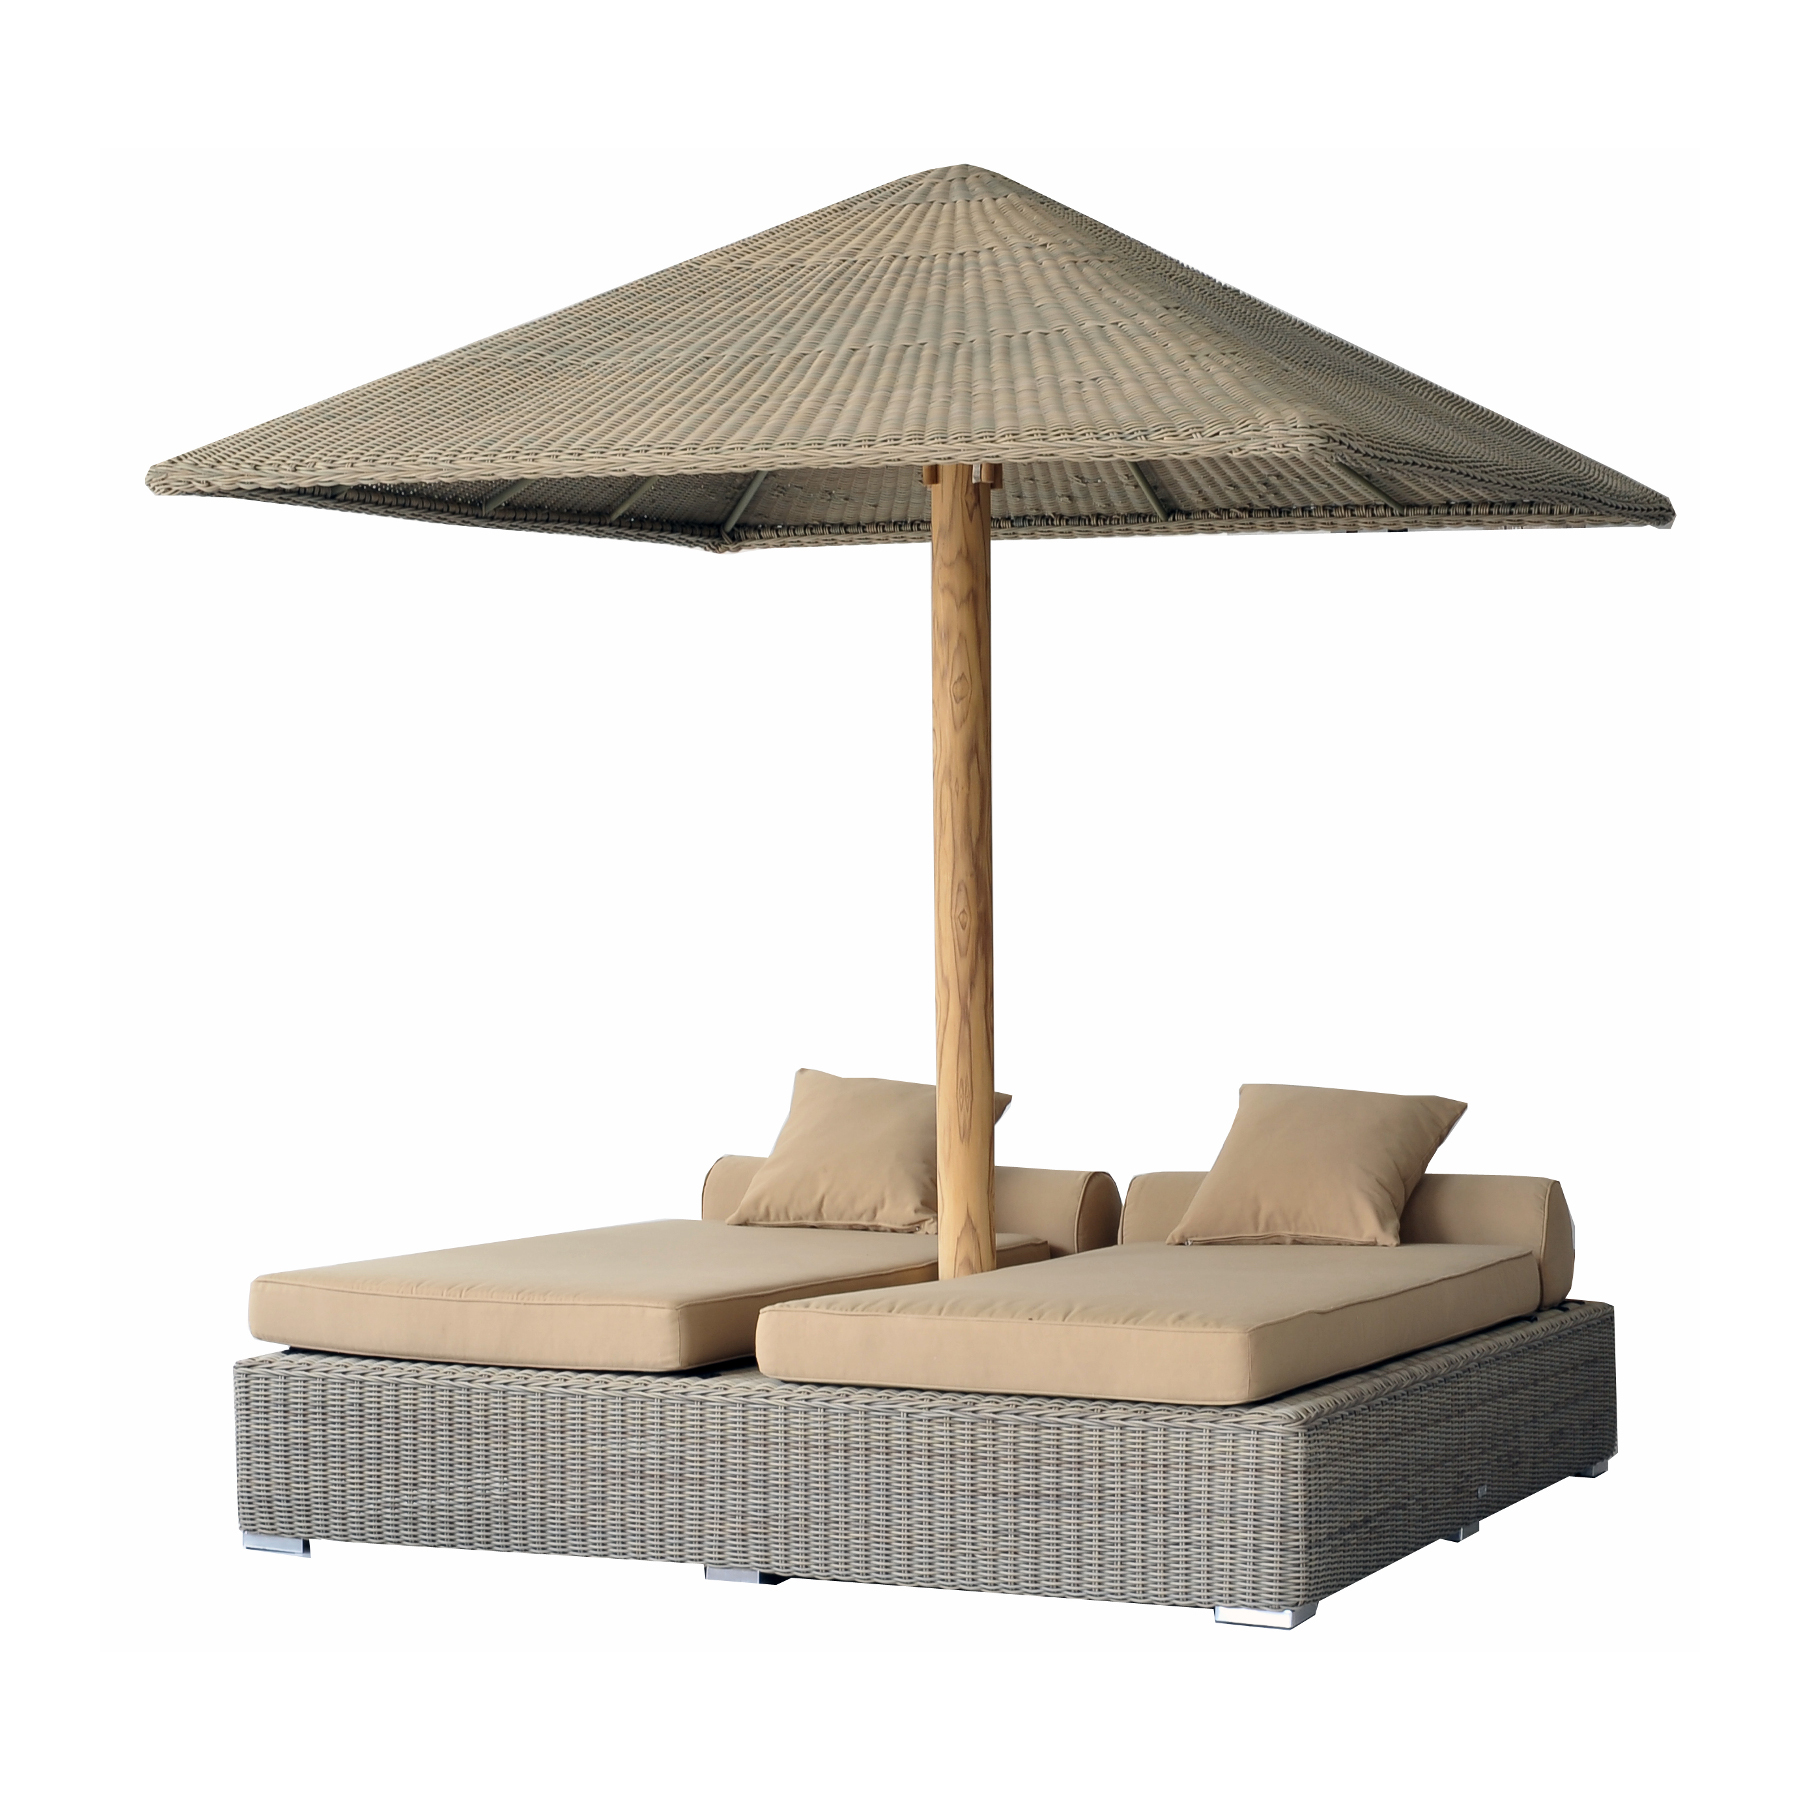 Outdoor Daybed With Umbrella : Find the perfect patio furniture ...